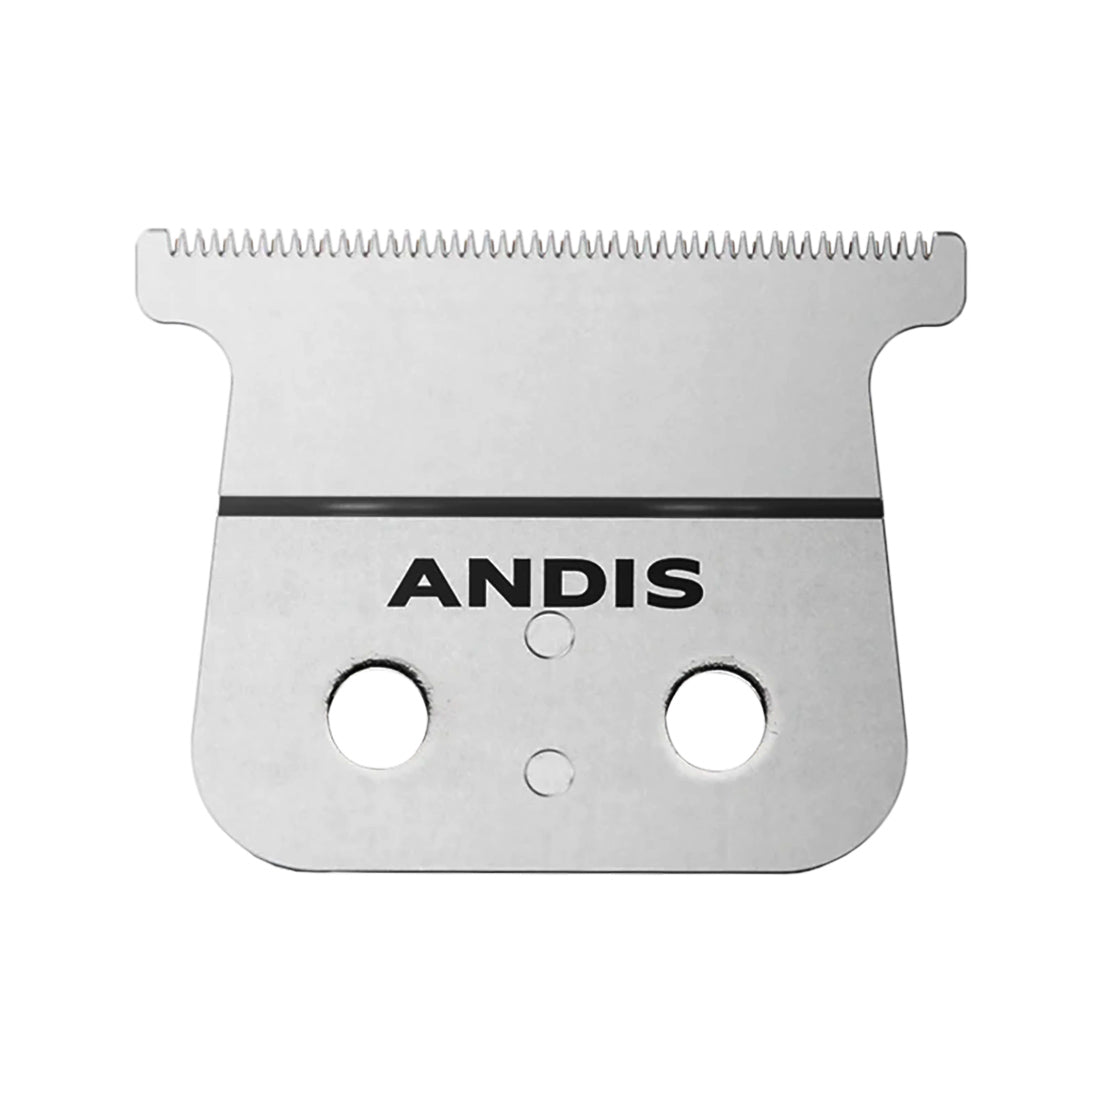 Andis beSPOKE GTX-Z Trimmer Replacement Blade #560149